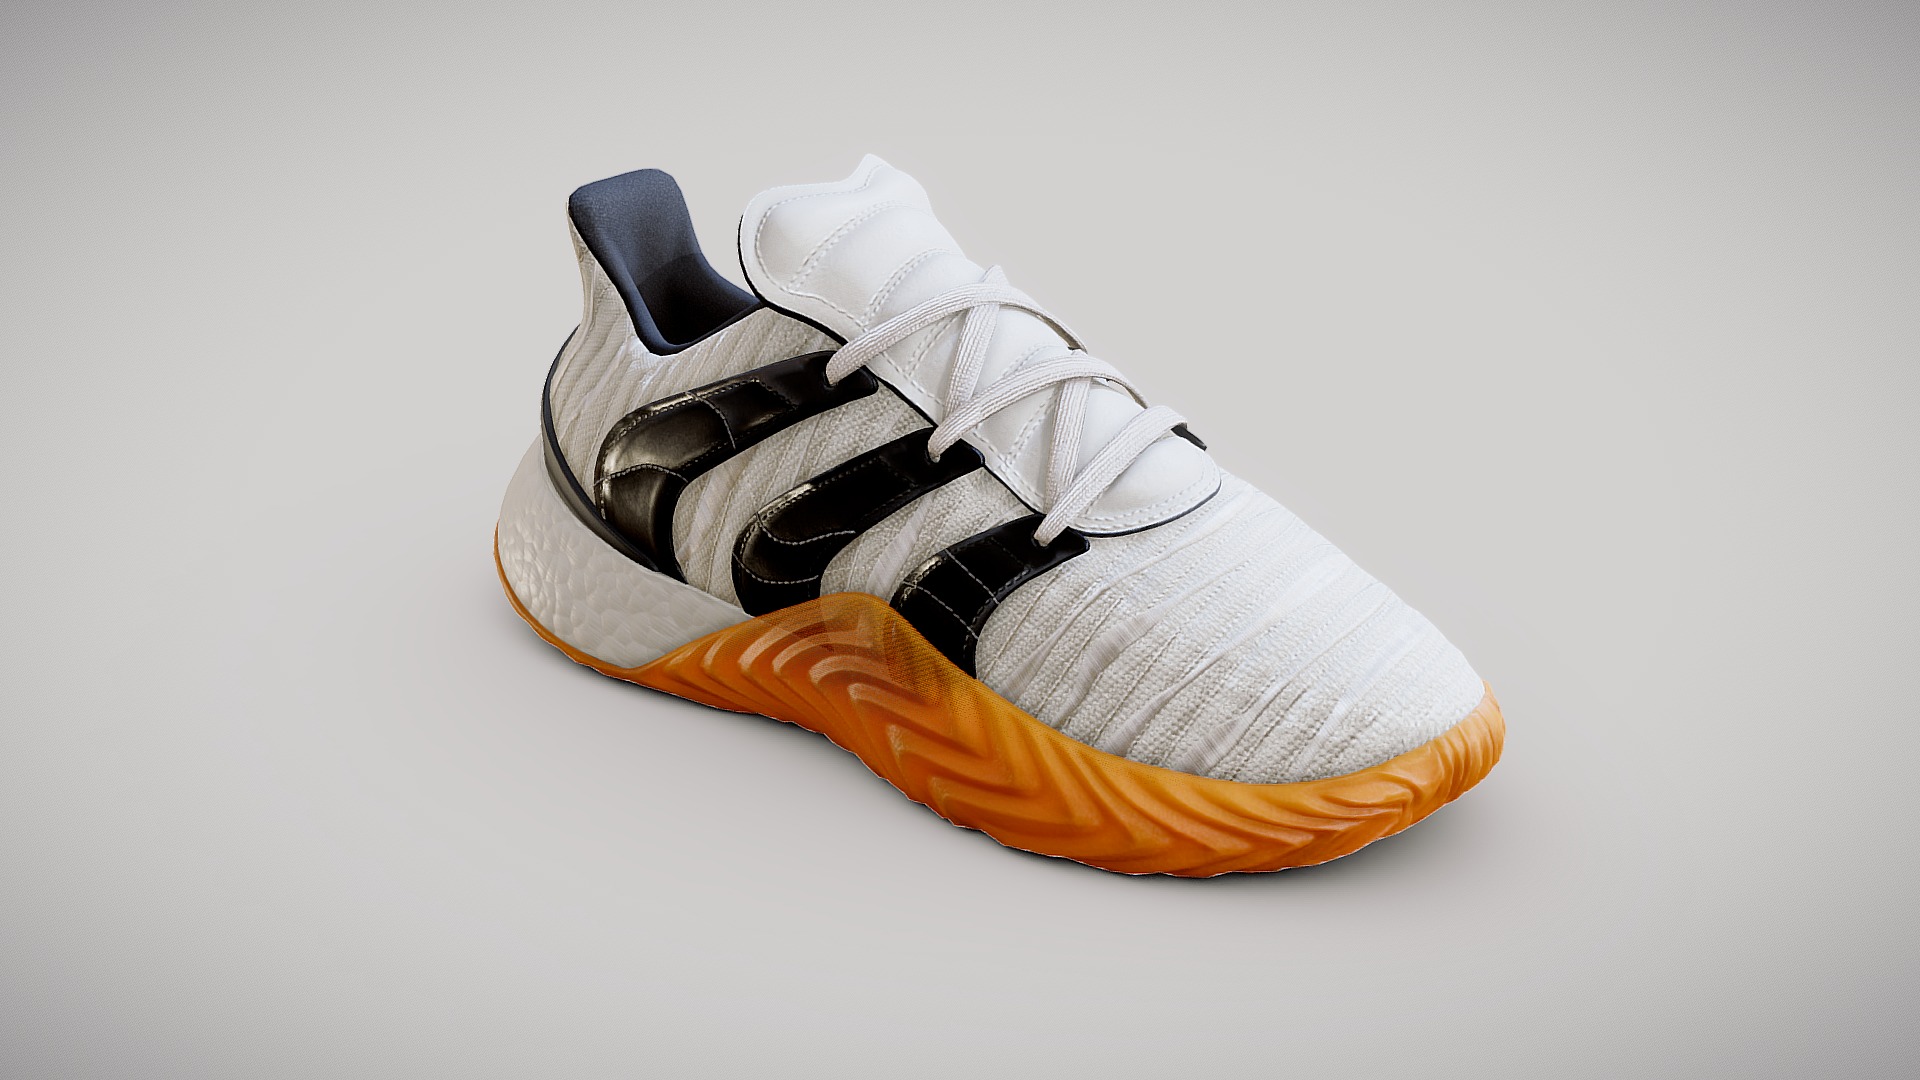 3D model Adidas Sobakov 2 0 Originals white - This is a 3D model of the Adidas Sobakov 2 0 Originals white. The 3D model is about a pair of white and black sneakers.